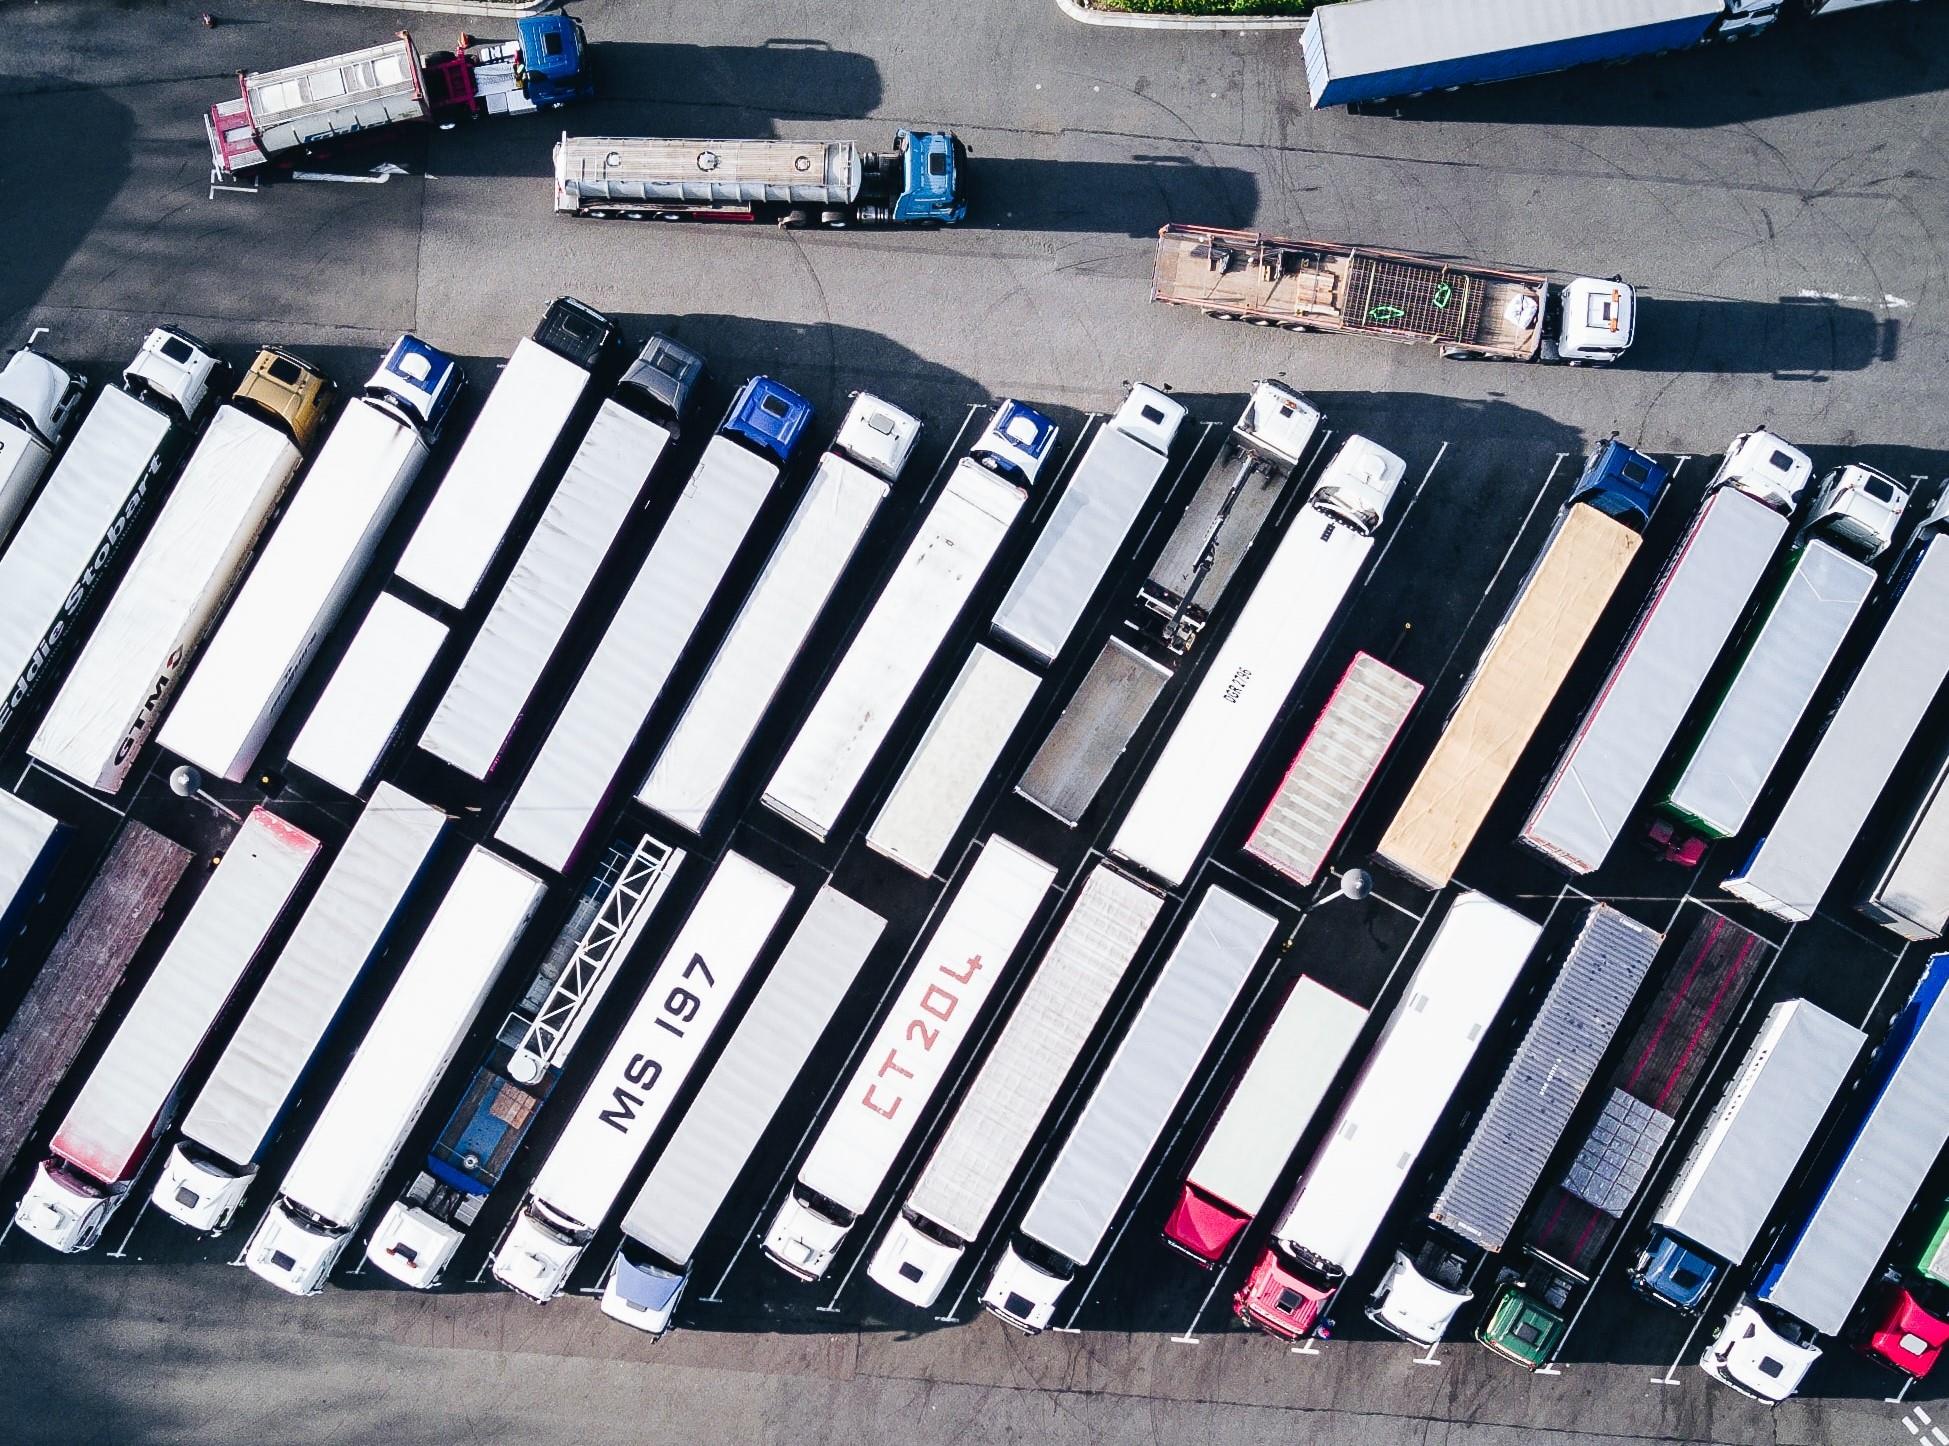 Parked semi trucks from above